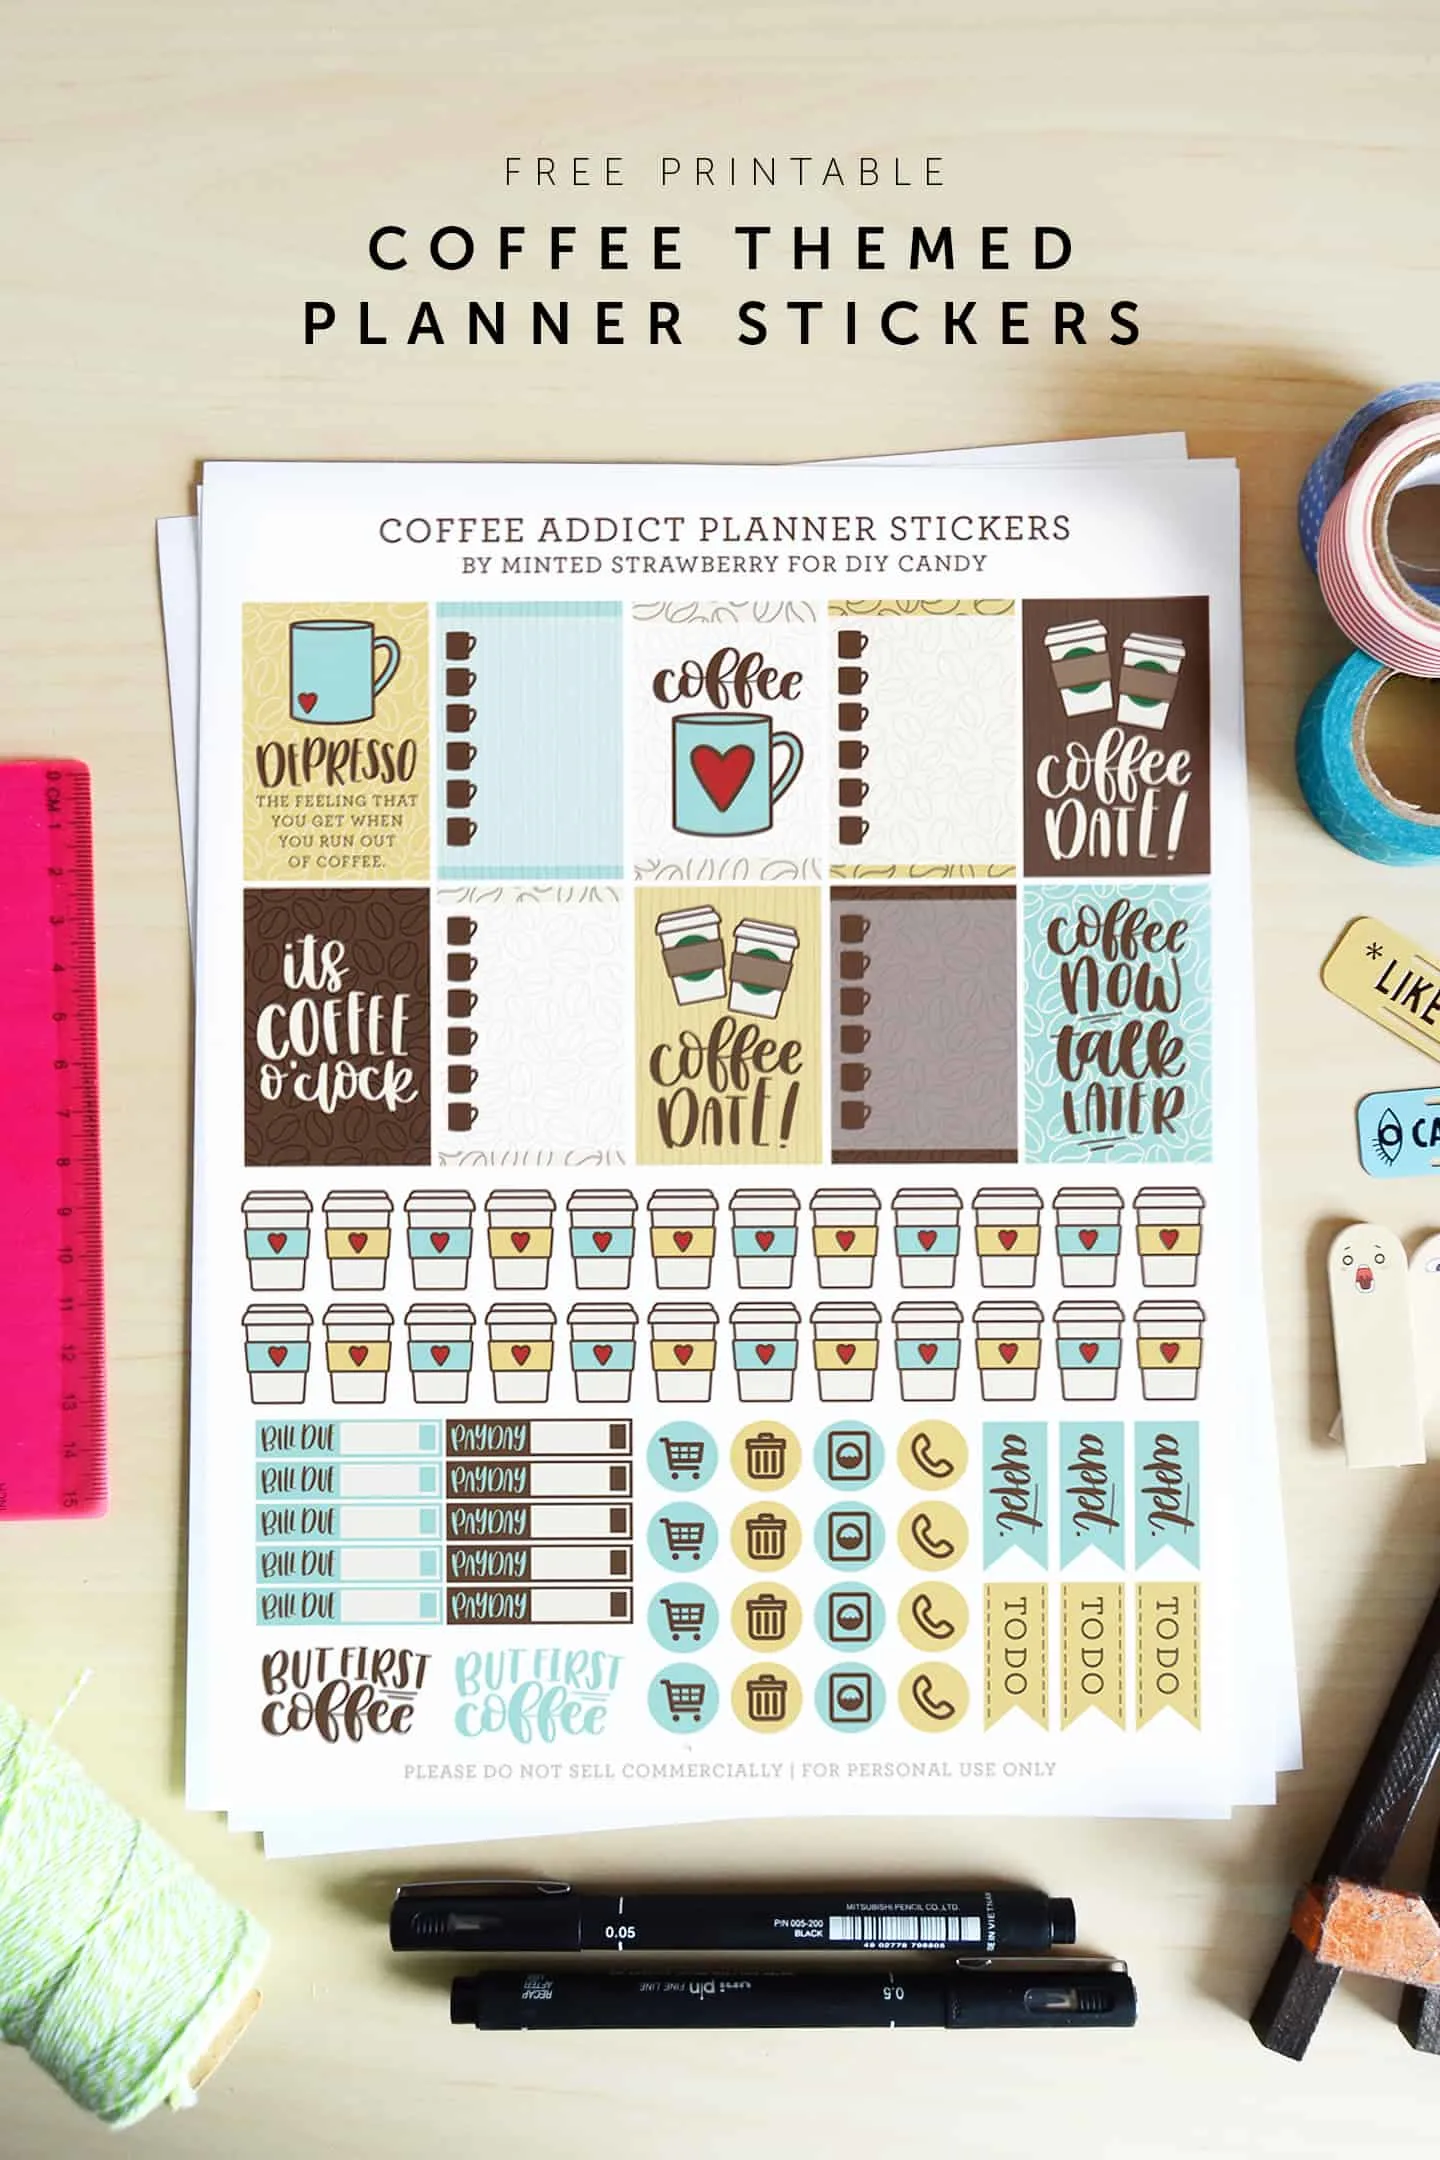 Free Printable Coffee Stickers for Your Planner